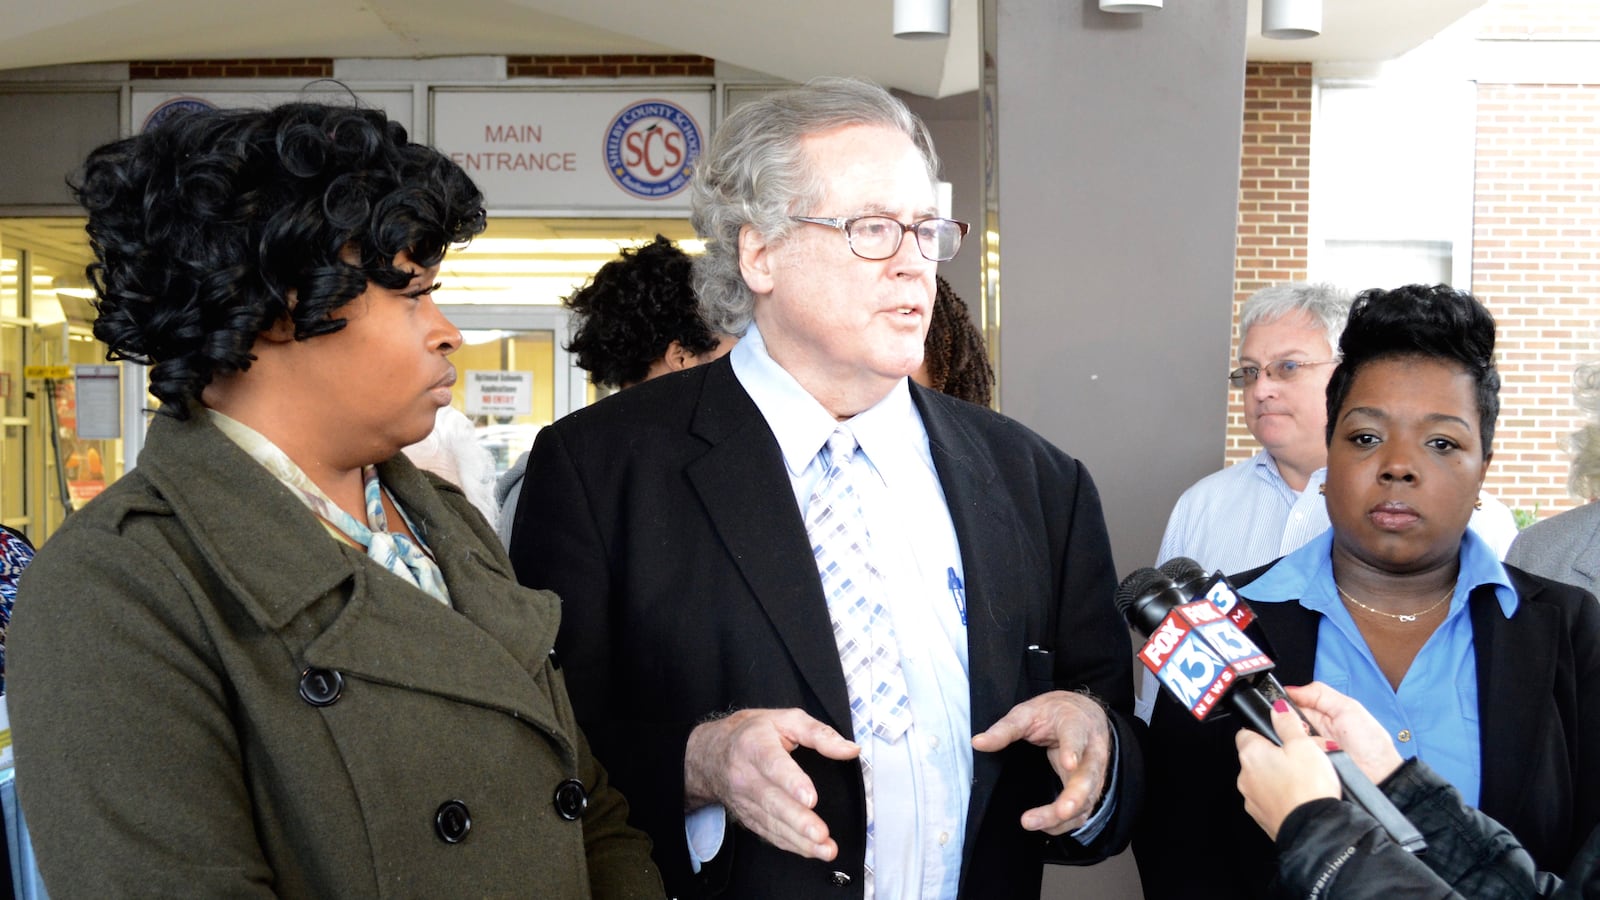 From left: Shelby County Schools Board of Education members Stephanie Love and Mike Kernell speak at an anti-voucher rally that was attended by supporters of the pro-voucher group Black Alliance for Educational Options.